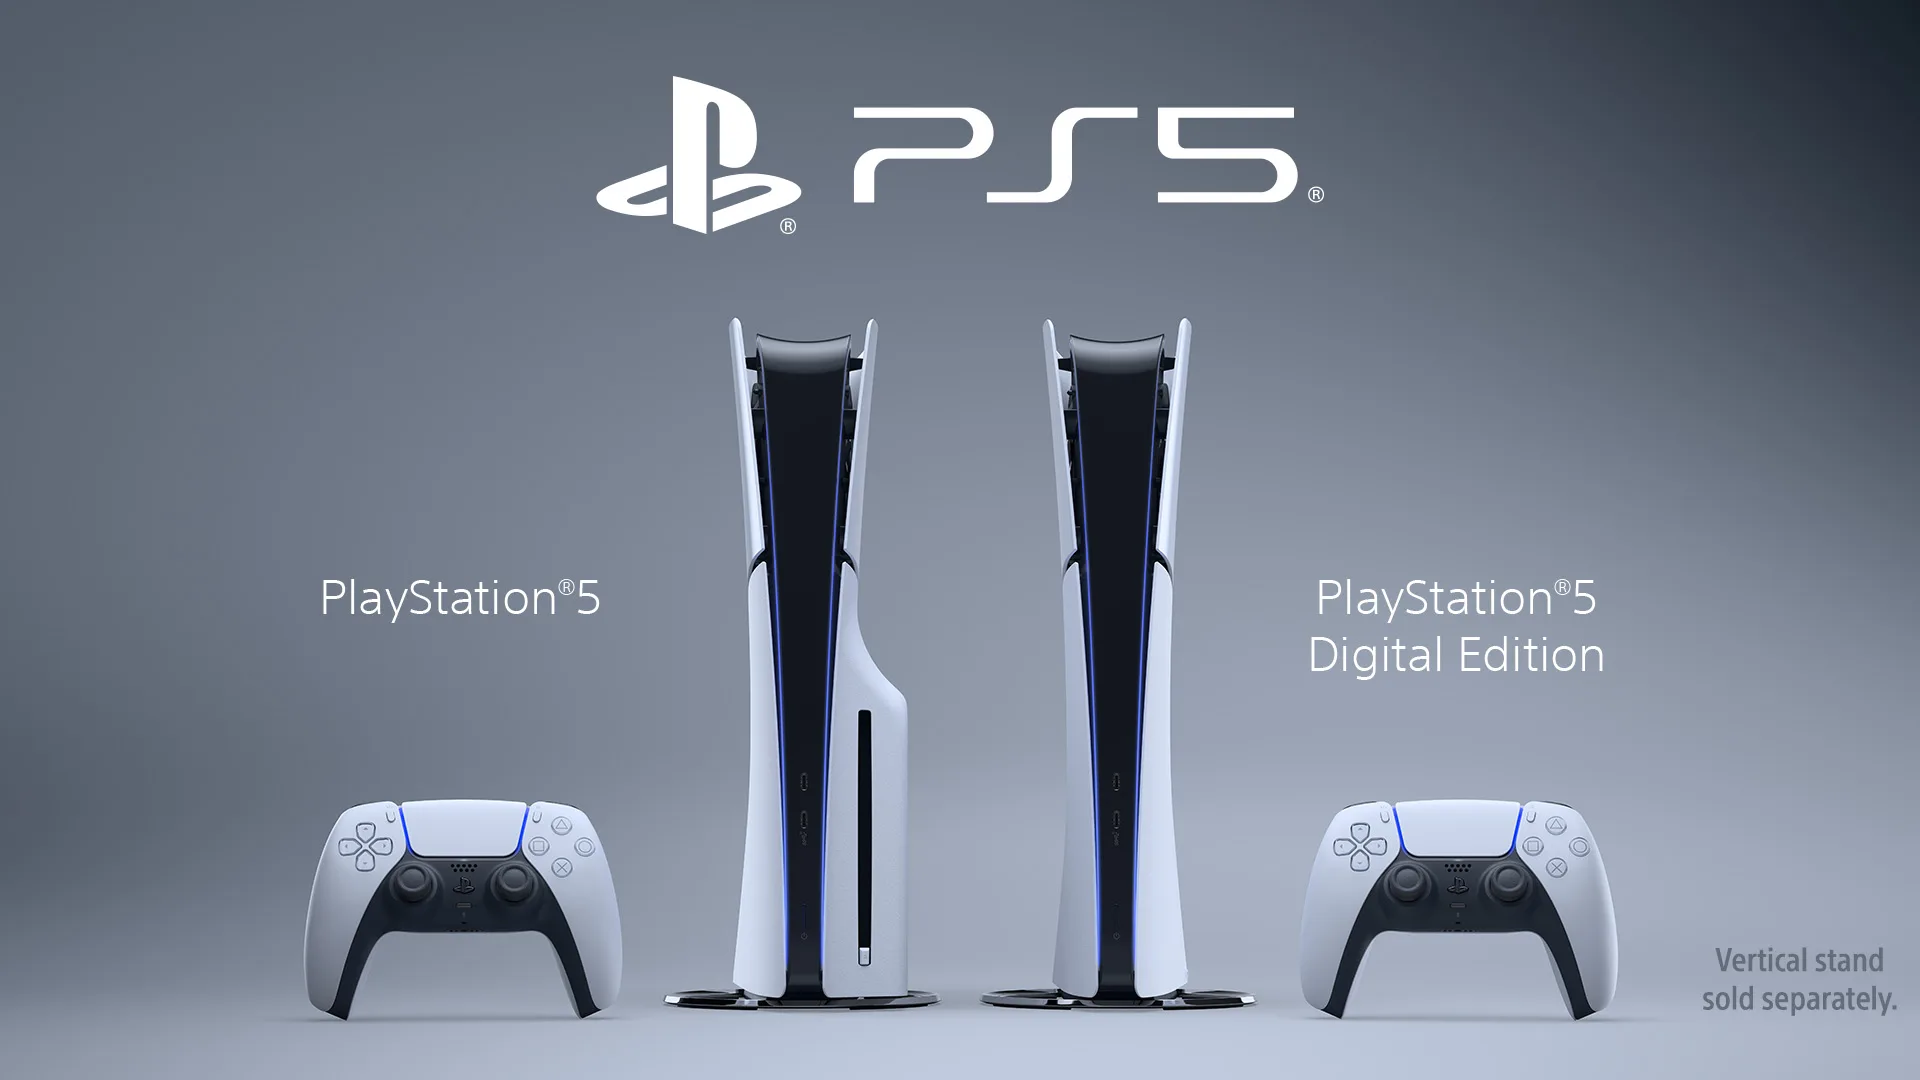 Sony Announces New Slimmer PlayStation 5 Models with More Storage and Removable Disc Drive